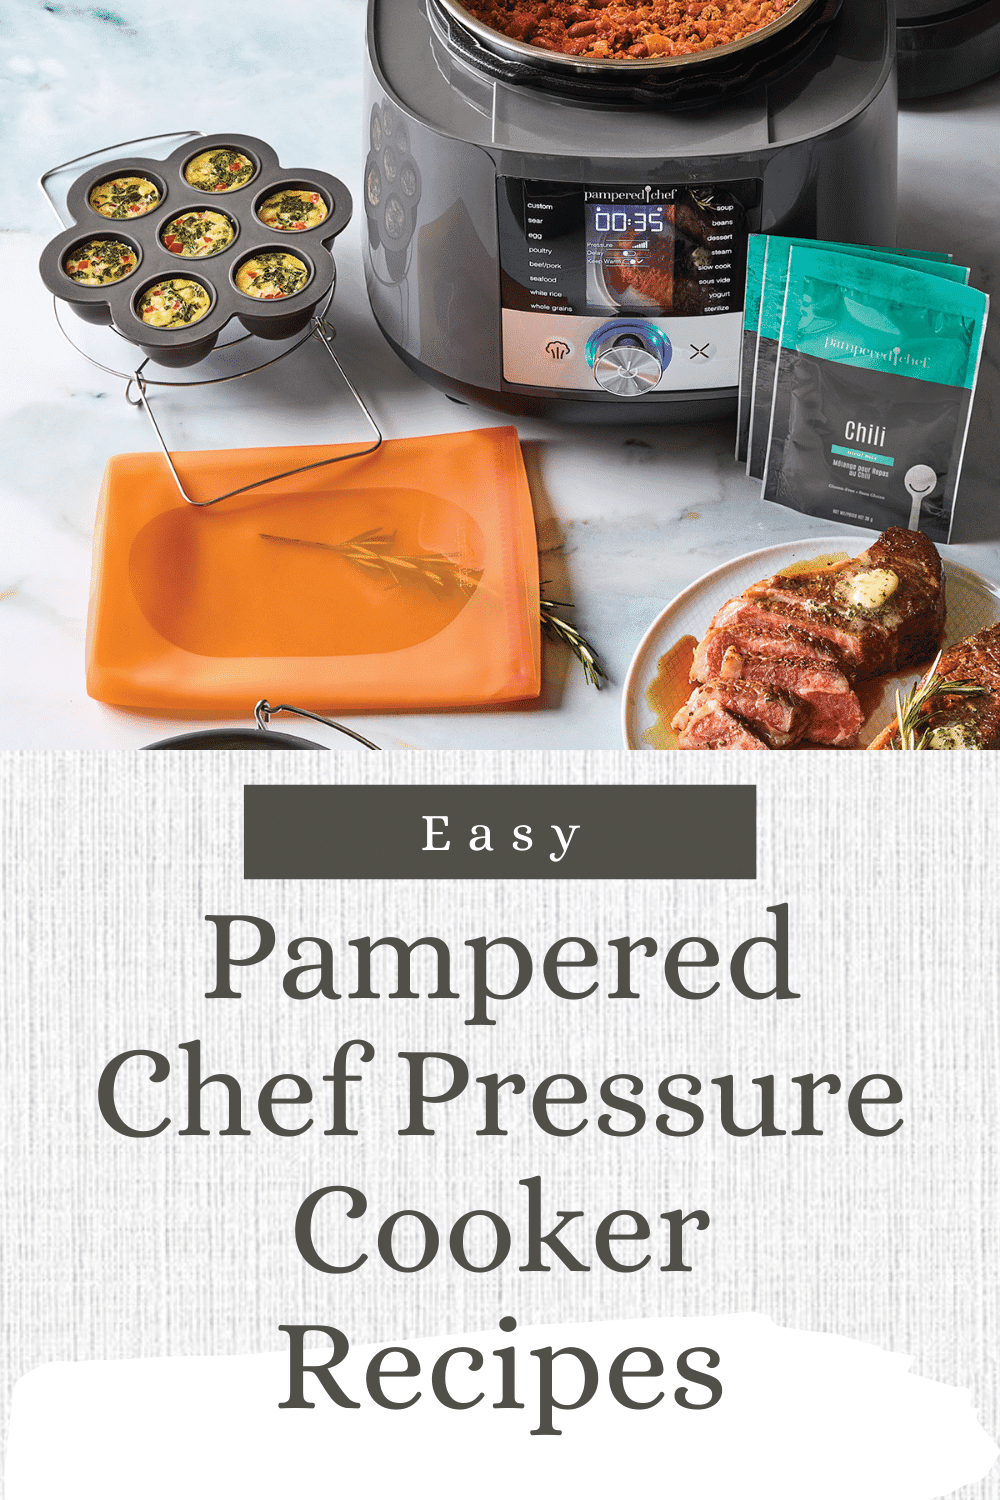 Pampered Chef Rice Cooker Instructions {Micro-Cooker Recipes} - Midwest  Goodness